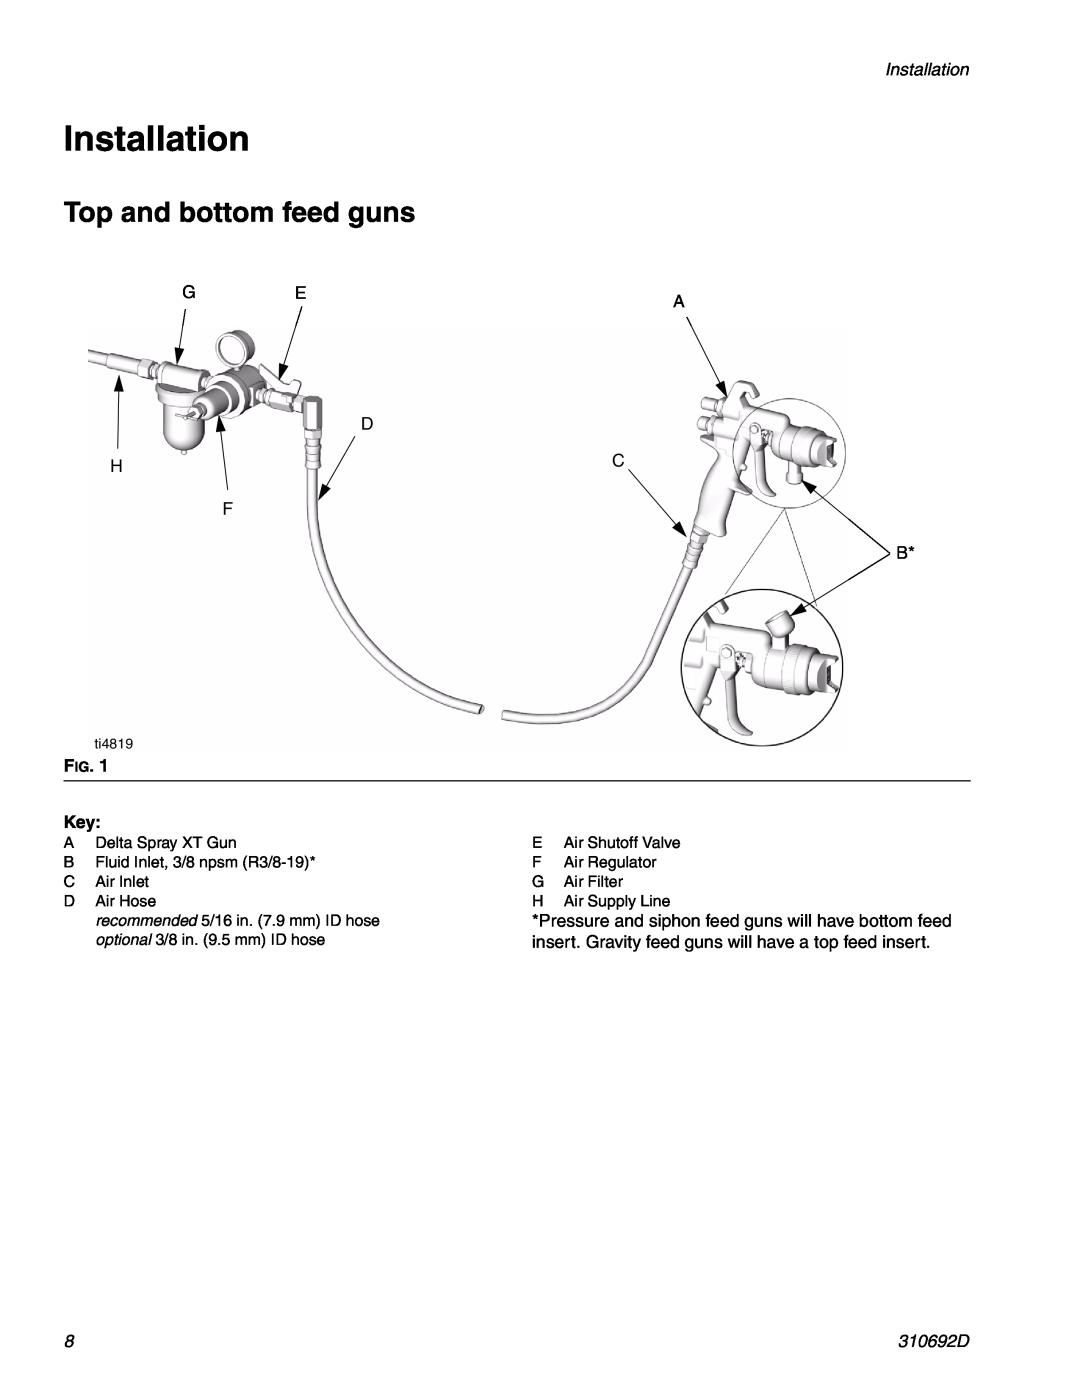 Graco 310692D important safety instructions Installation, Top and bottom feed guns 